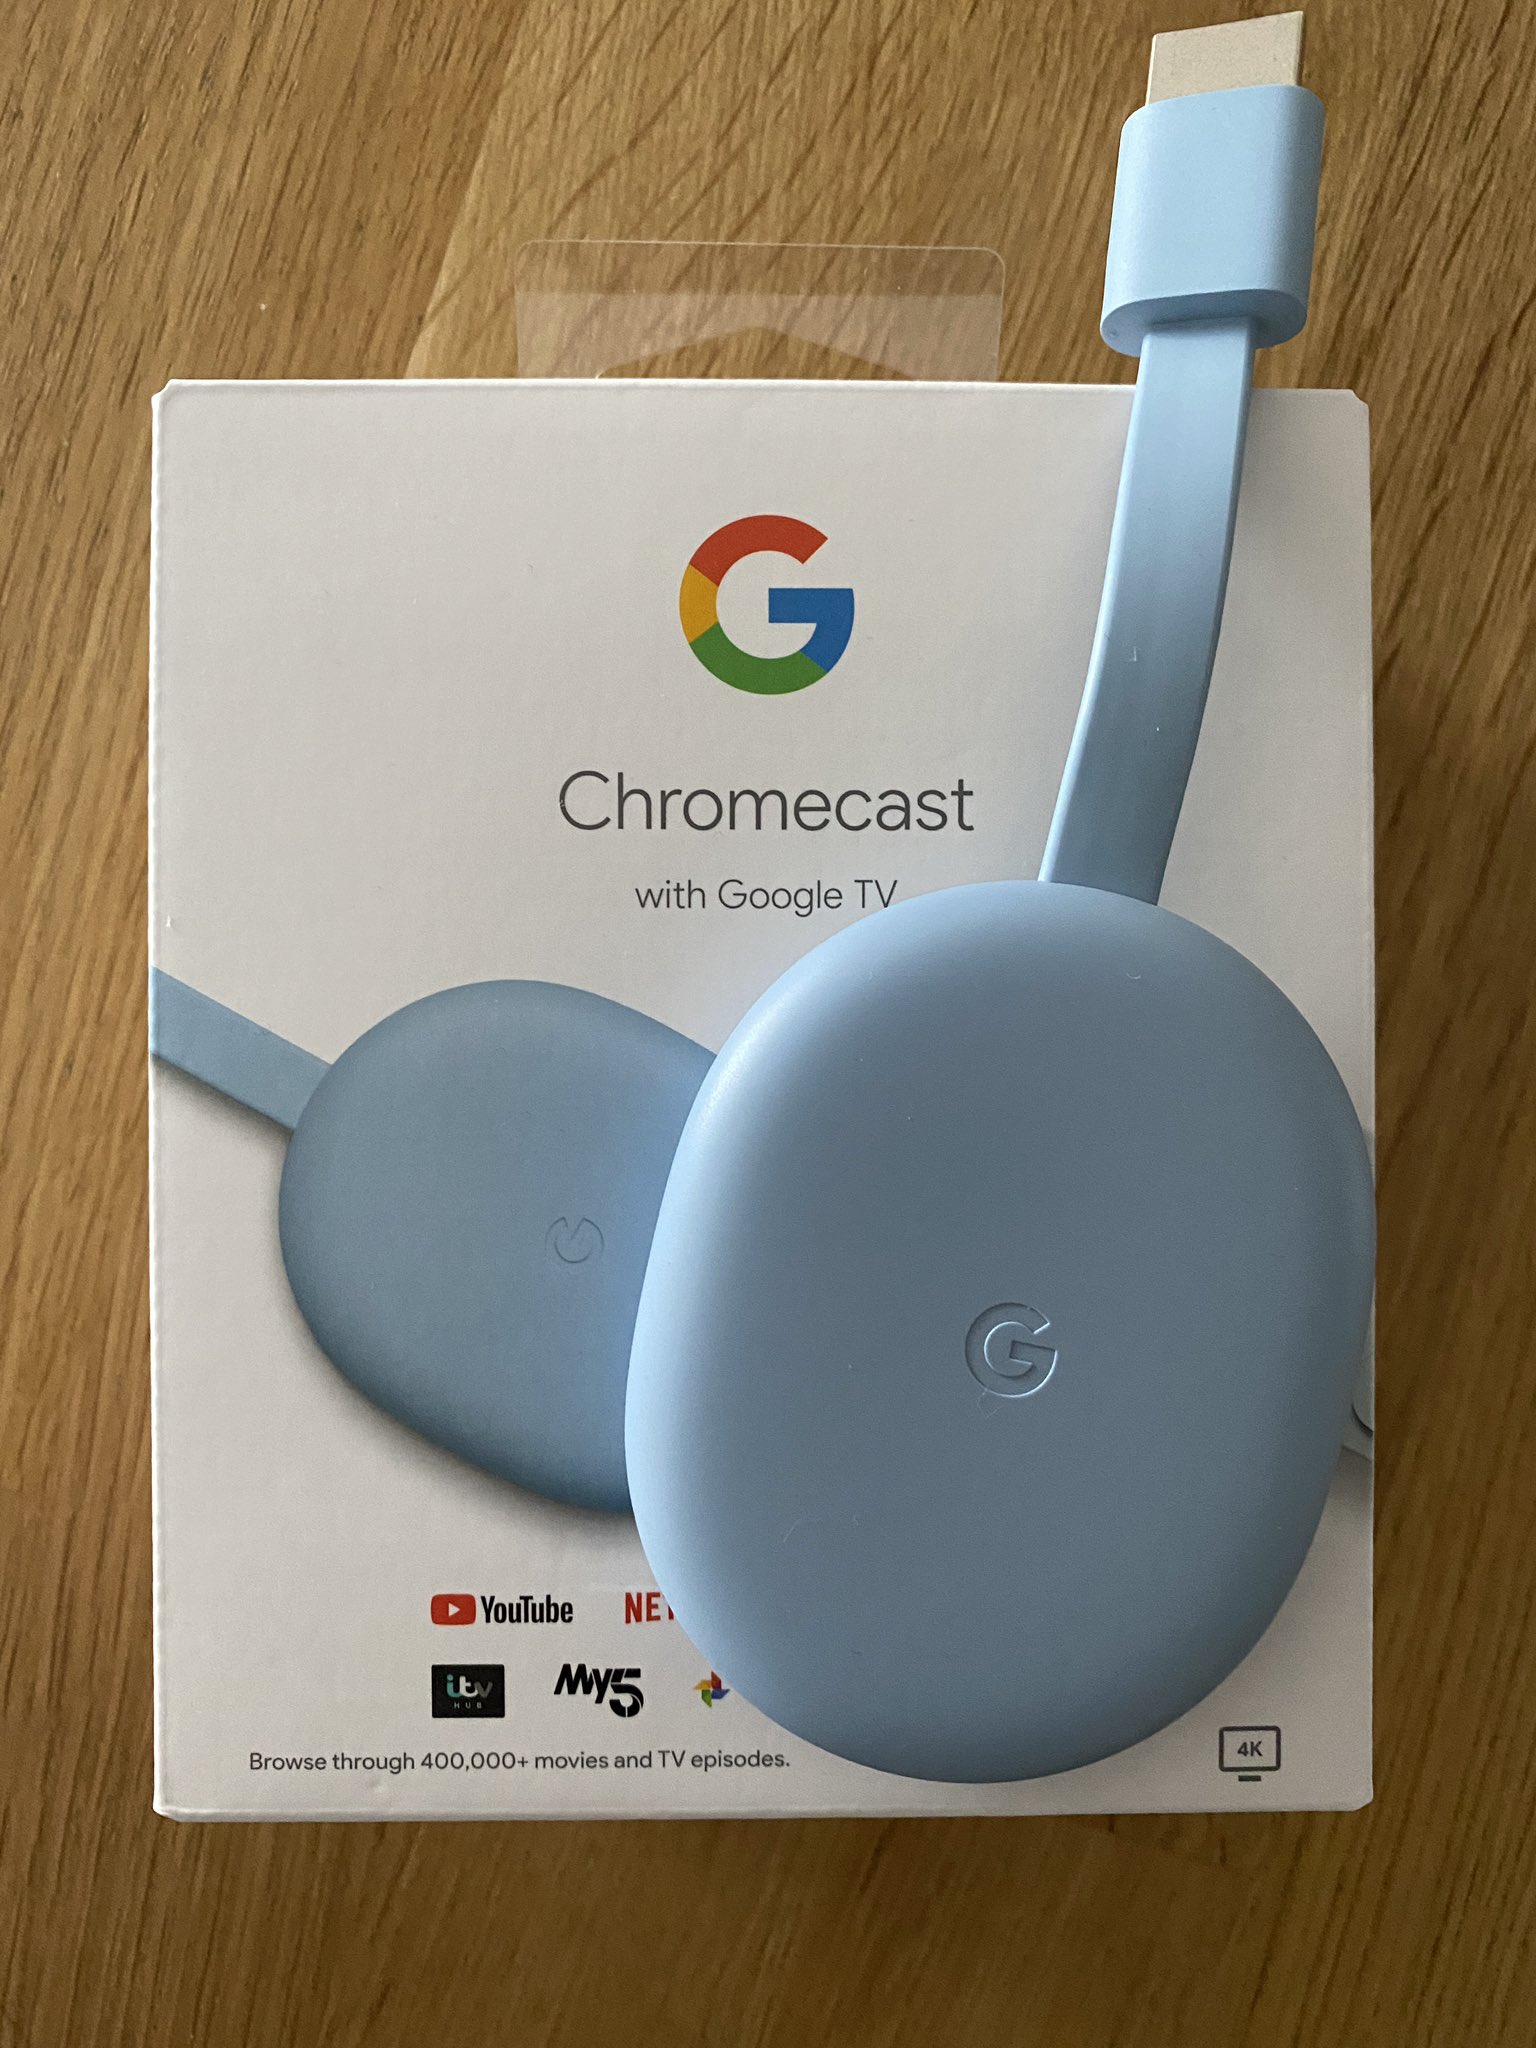 Bekræfte forvridning under Tom Warren on Twitter: "I was hoping to demo xCloud on the new Chromecast,  but it's running really strange for me. I keep getting buffering (despite  5Ghz WiFi) and the app freezing